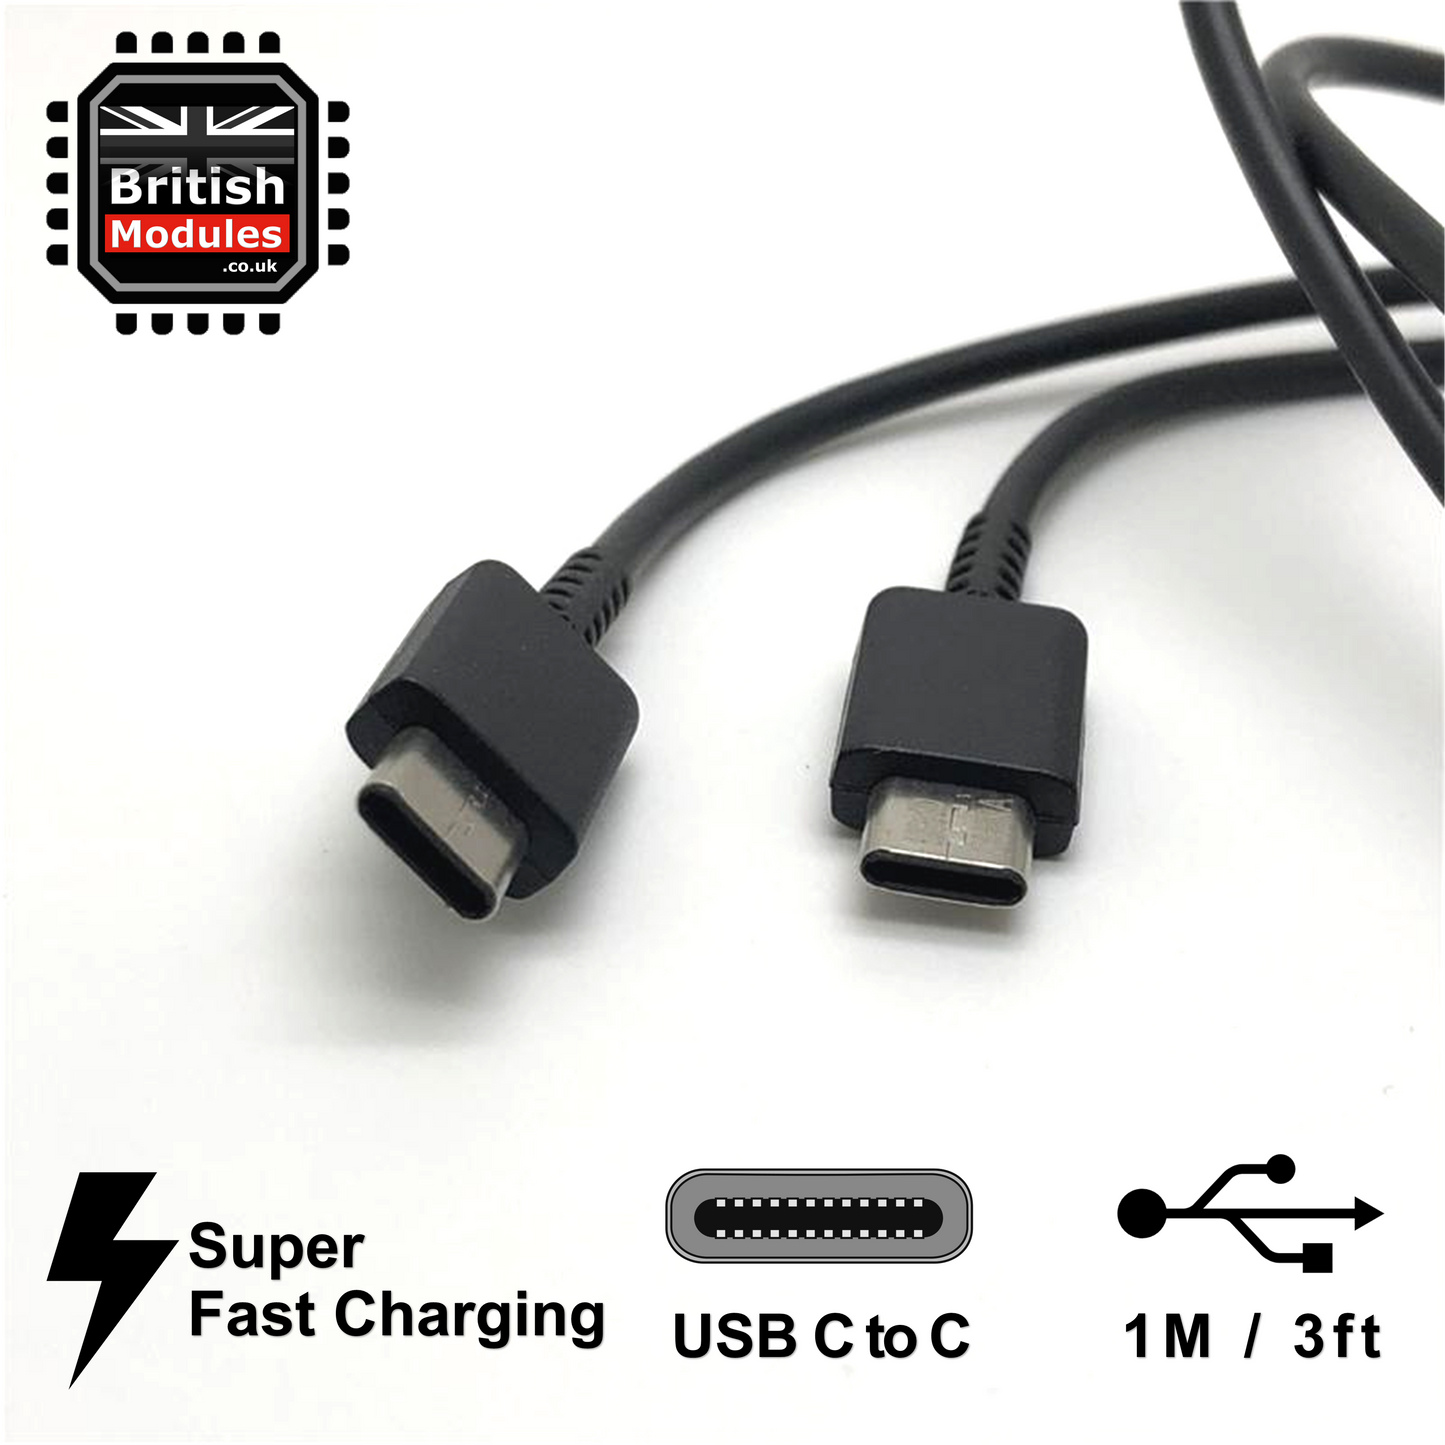 Samsung Super Fast Charger & Cable USB Type C to C for S22 Ultra 5G S21 20 Note20 Note10 S21 FE